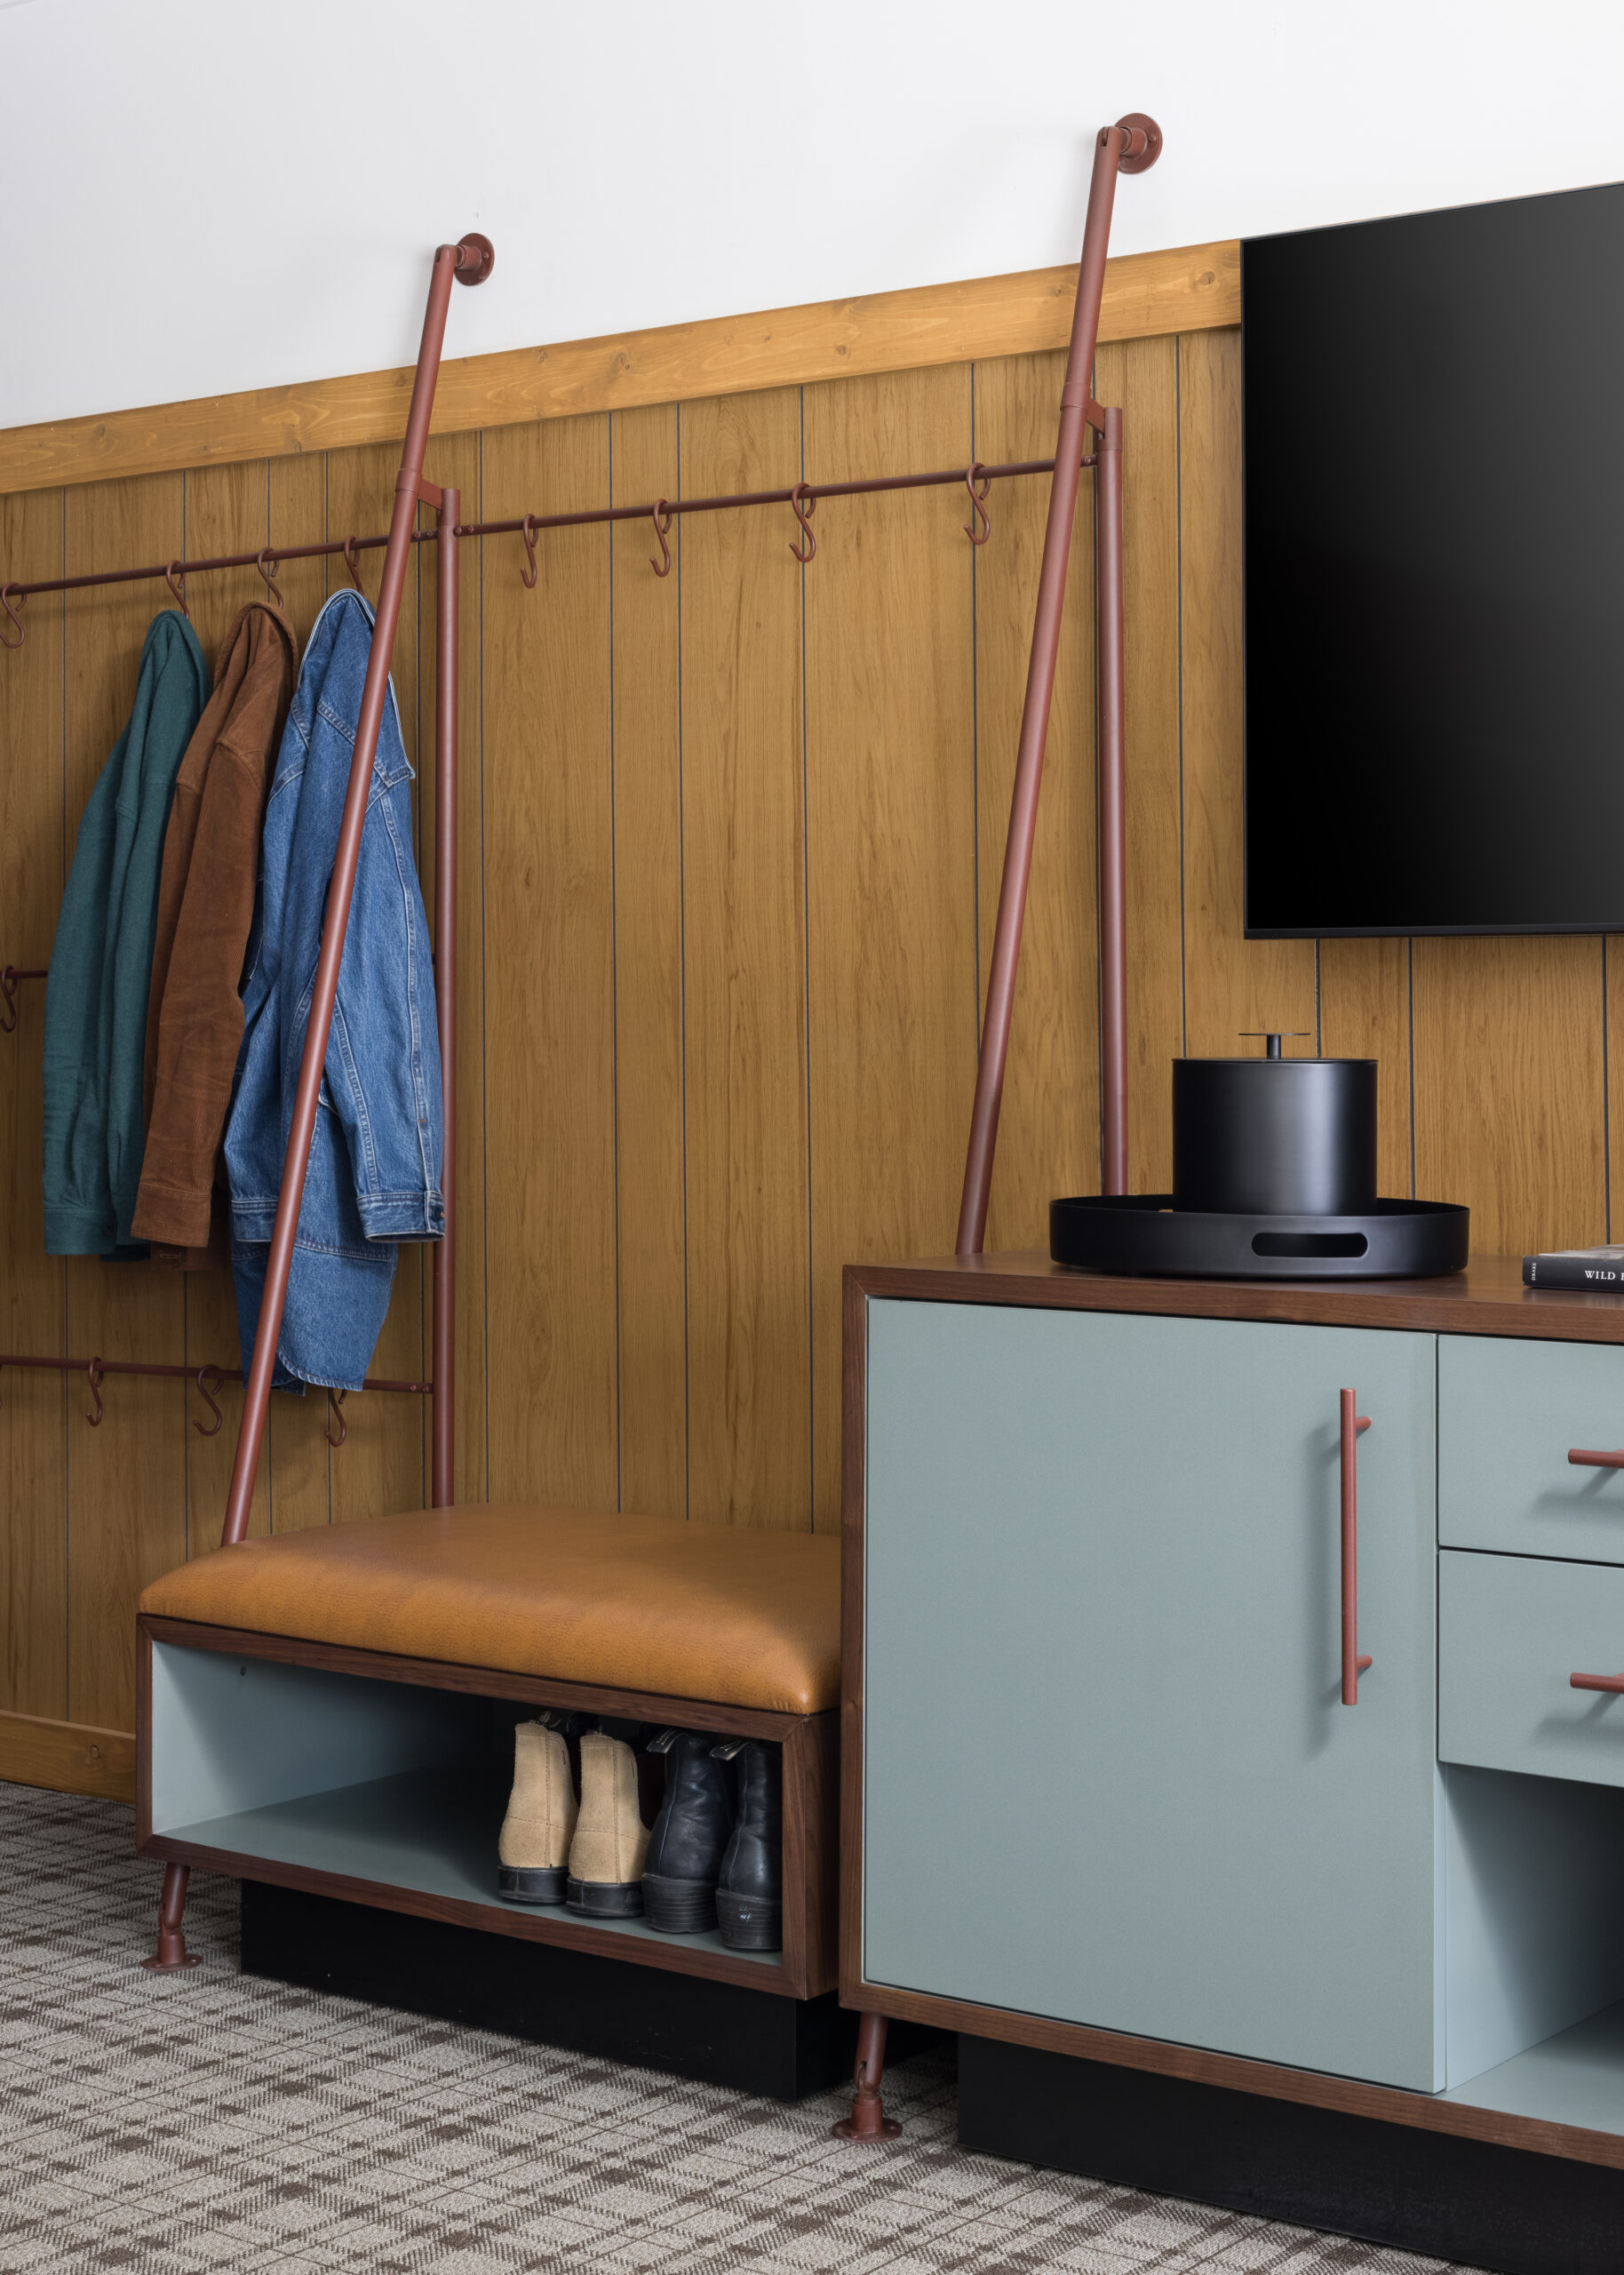 Clothes are properly hung, and shoes are neatly arranged on the rack beside the TV cabinets, with a TV mounted above.